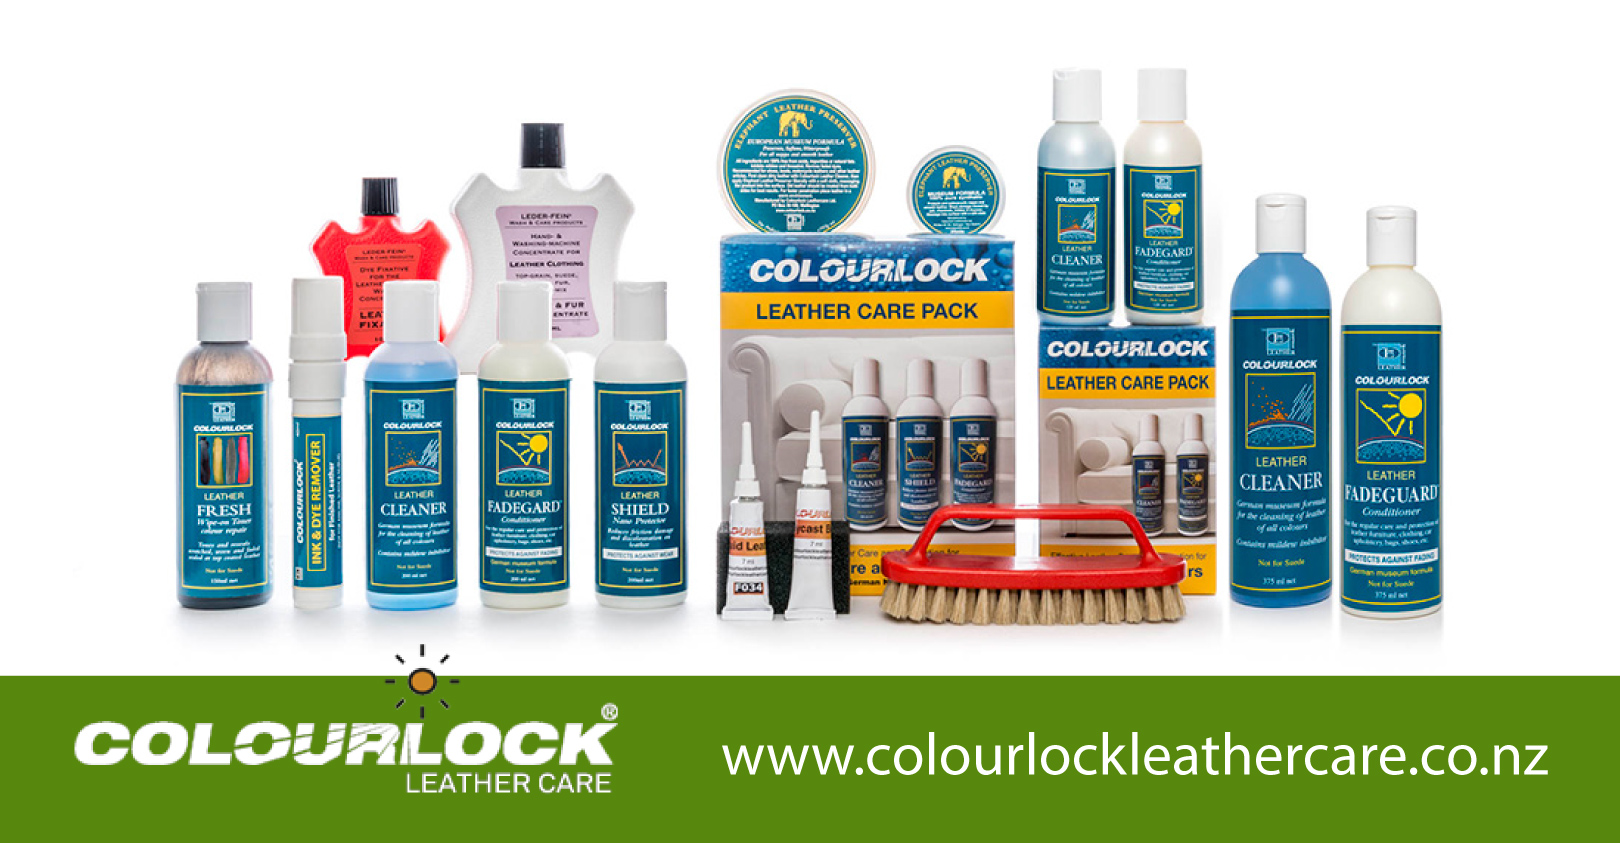 Leather Care Products - Leather Cleaner, Repairs - Colourlock